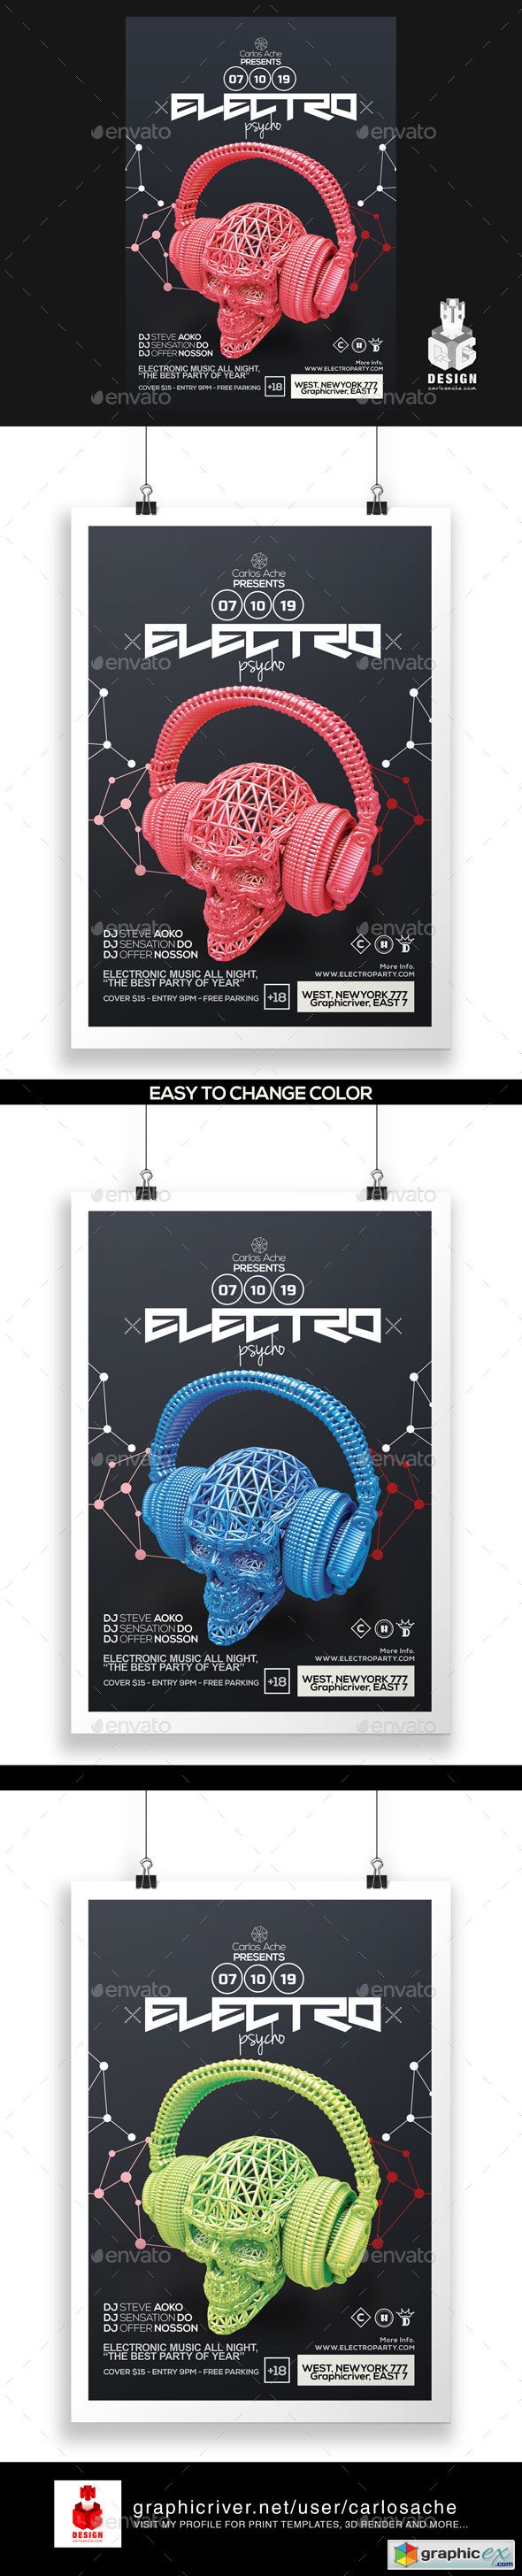 Electro Psycho Poster - Flyer Template